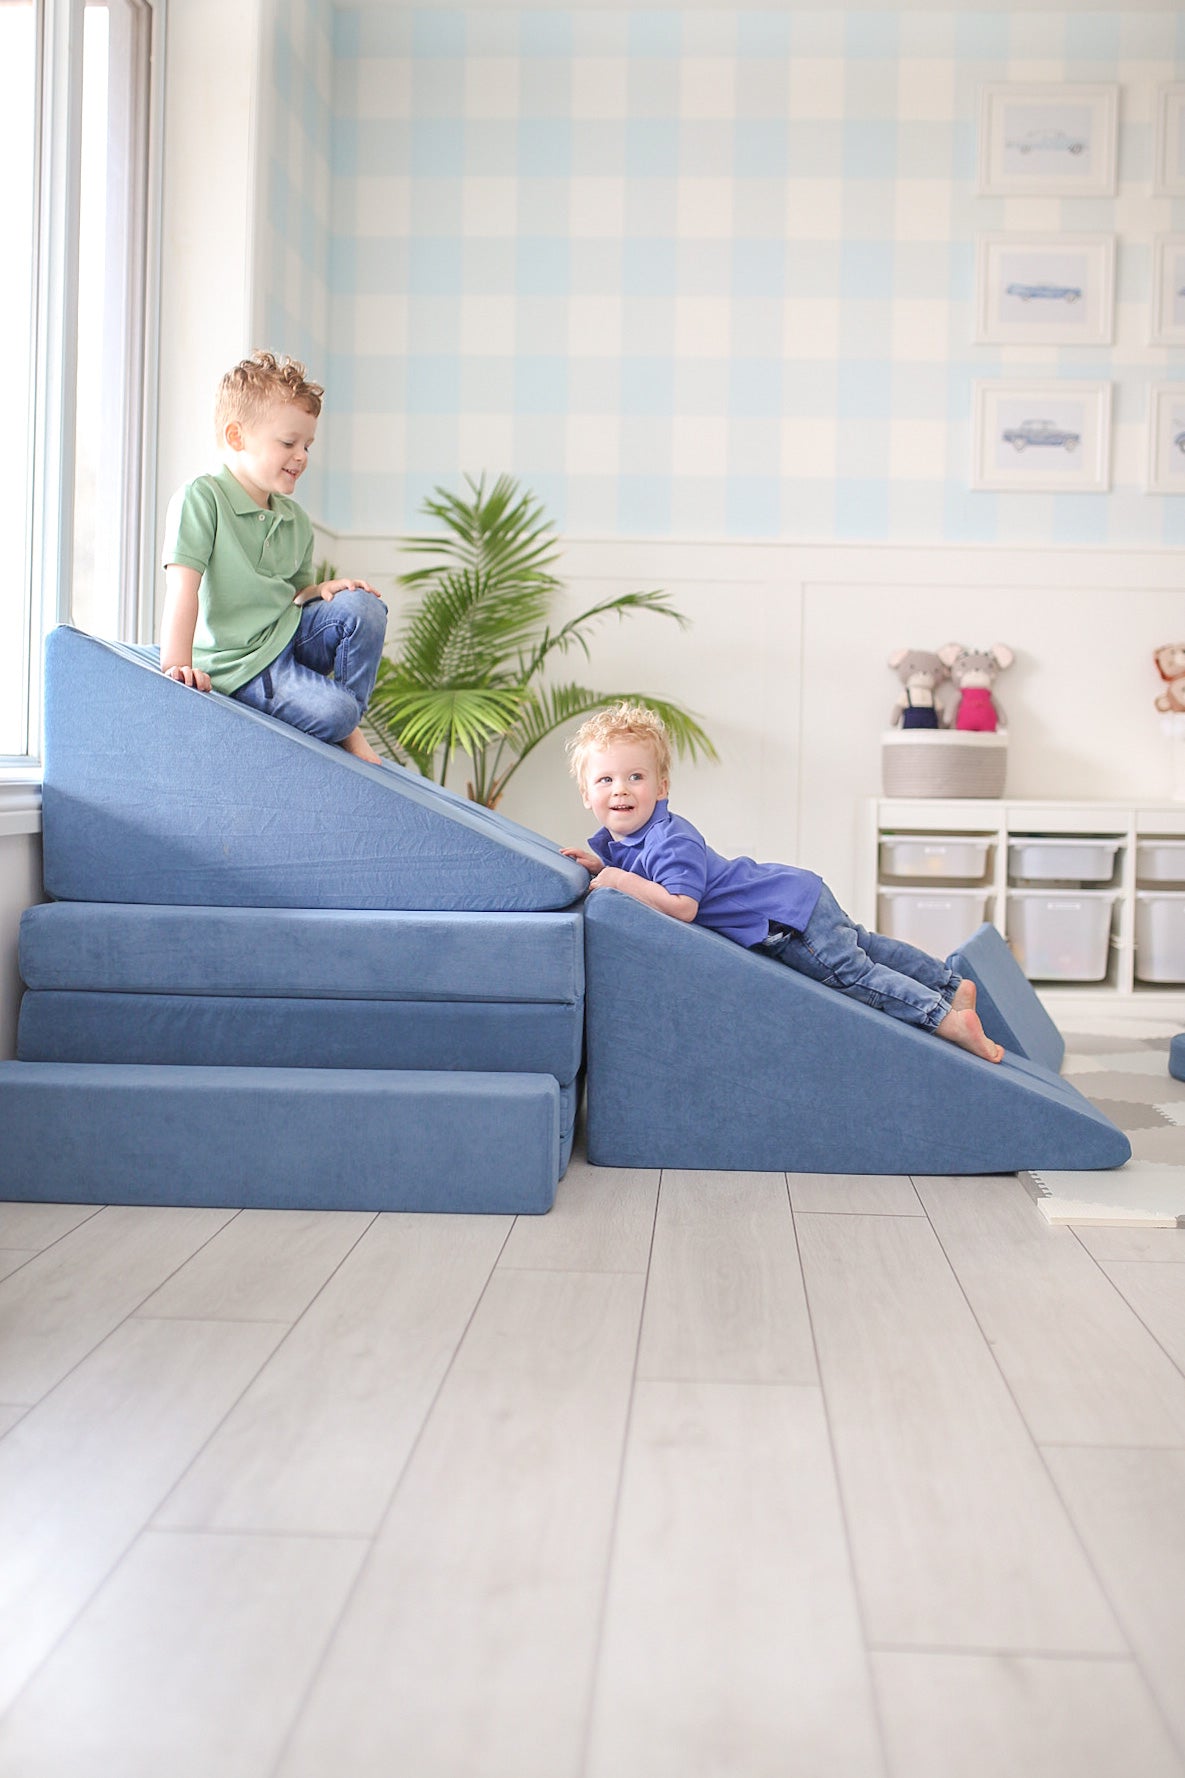 Ealing Indoor Kids Sofa Slide Climbing Slide Couch Stairs Extended